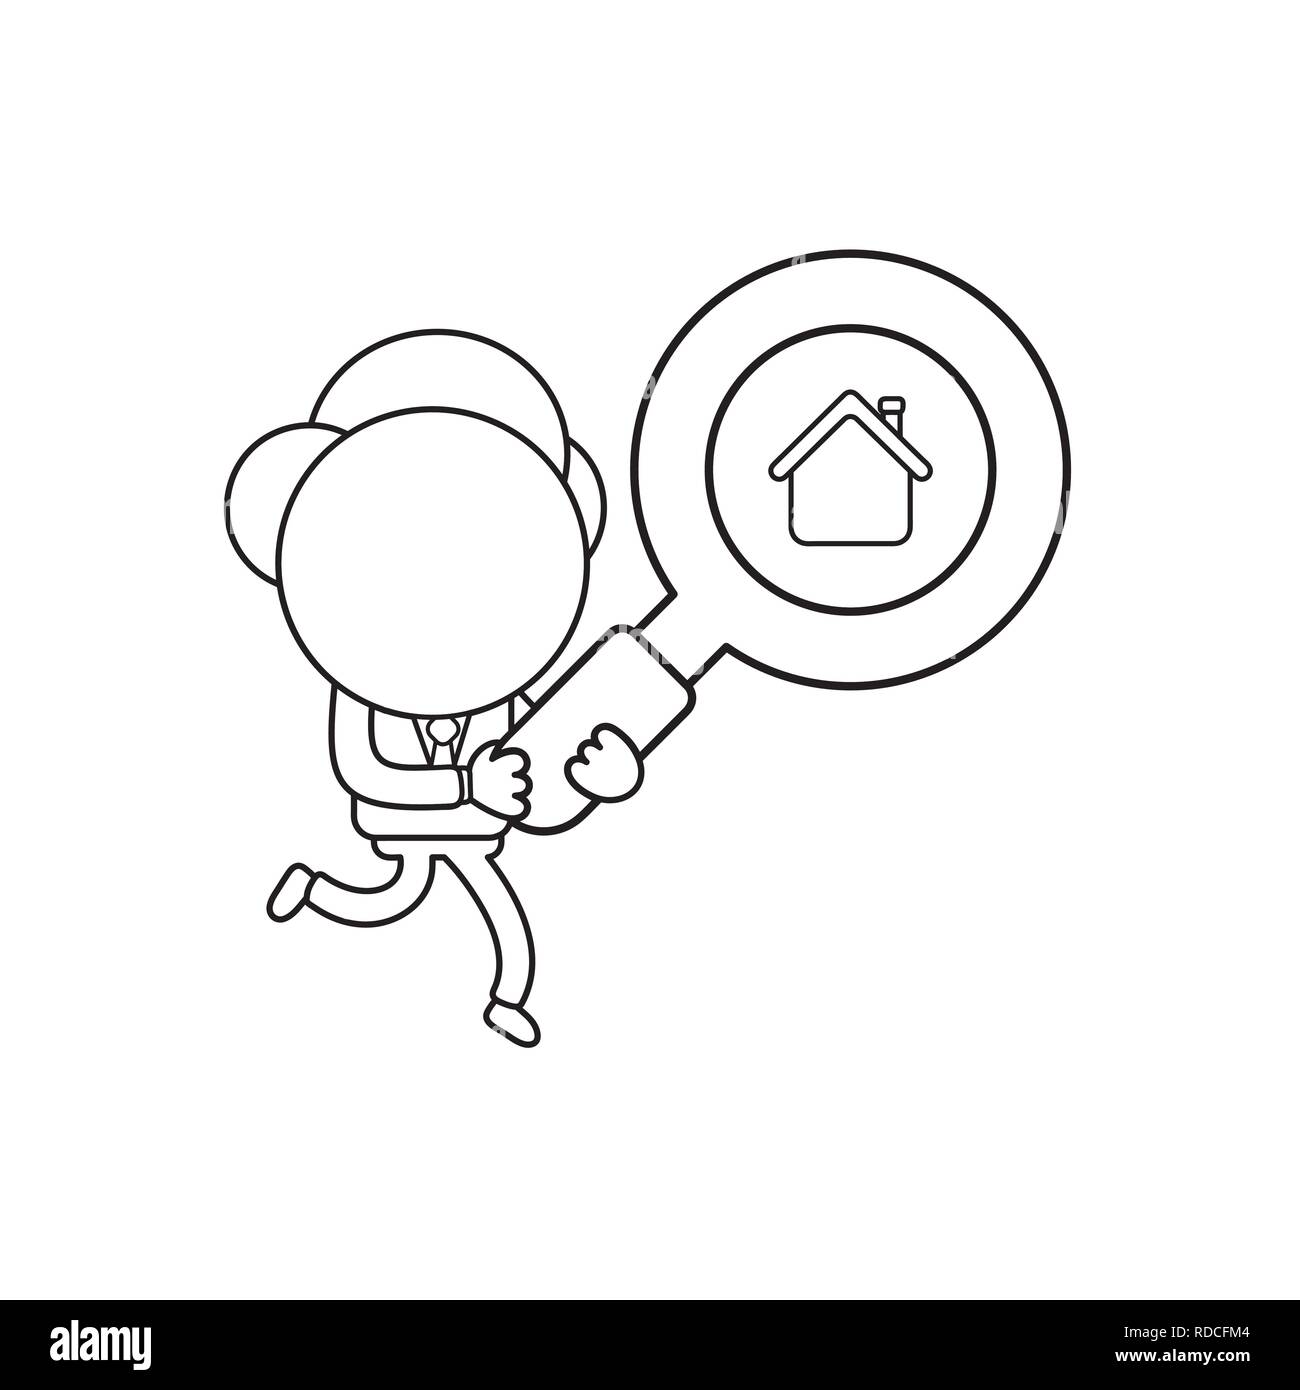 Vector illustration businessman character running and carrying magnifying glass with house icon. Black outline. Stock Vector